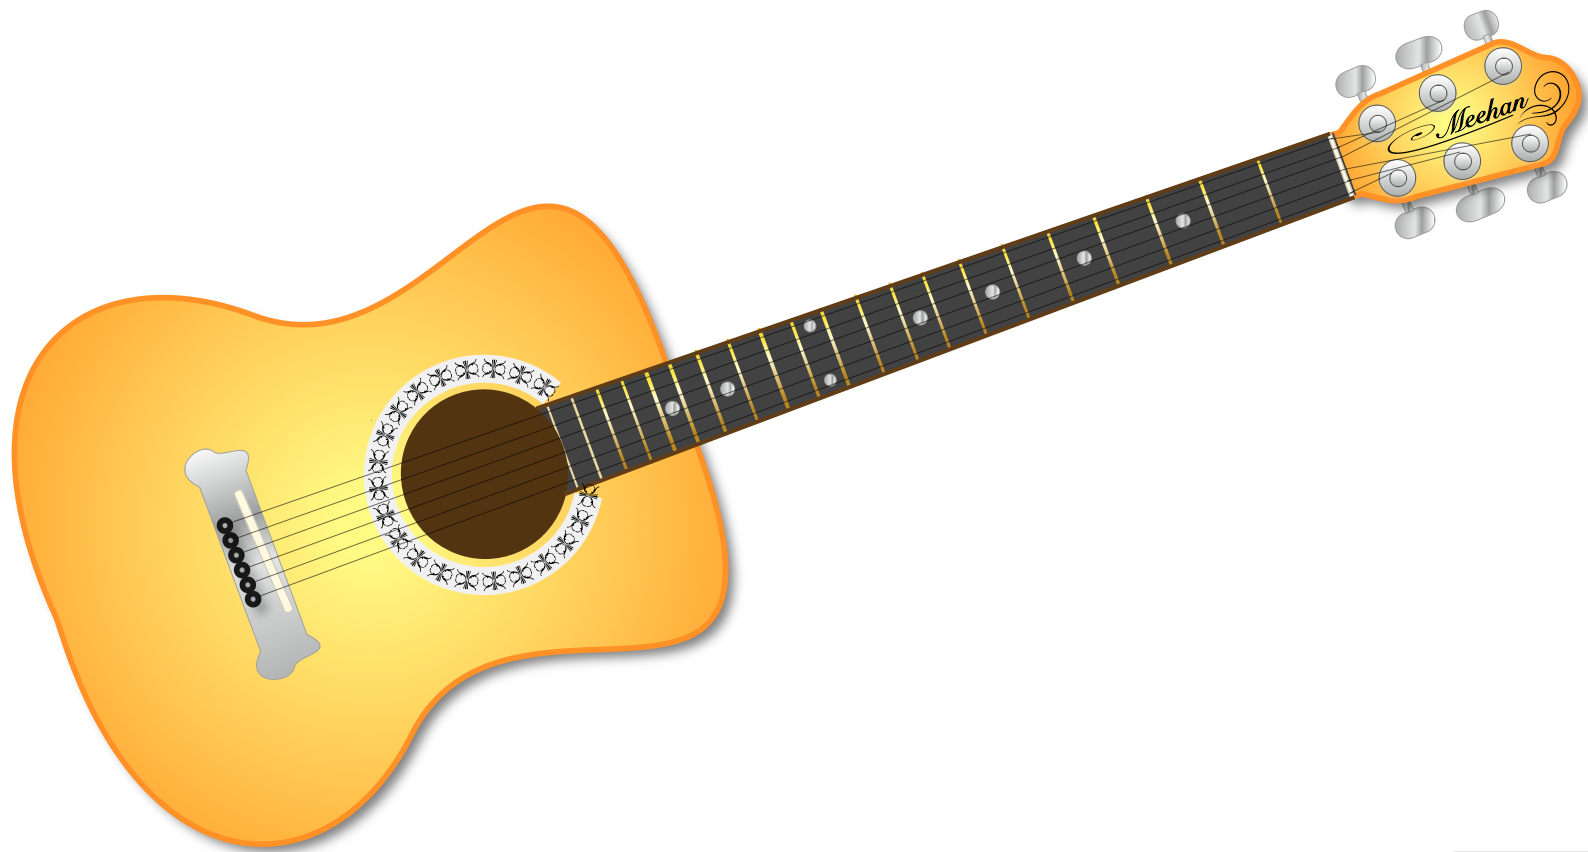 Guitar Fretboard Images Free Download Png Clipart